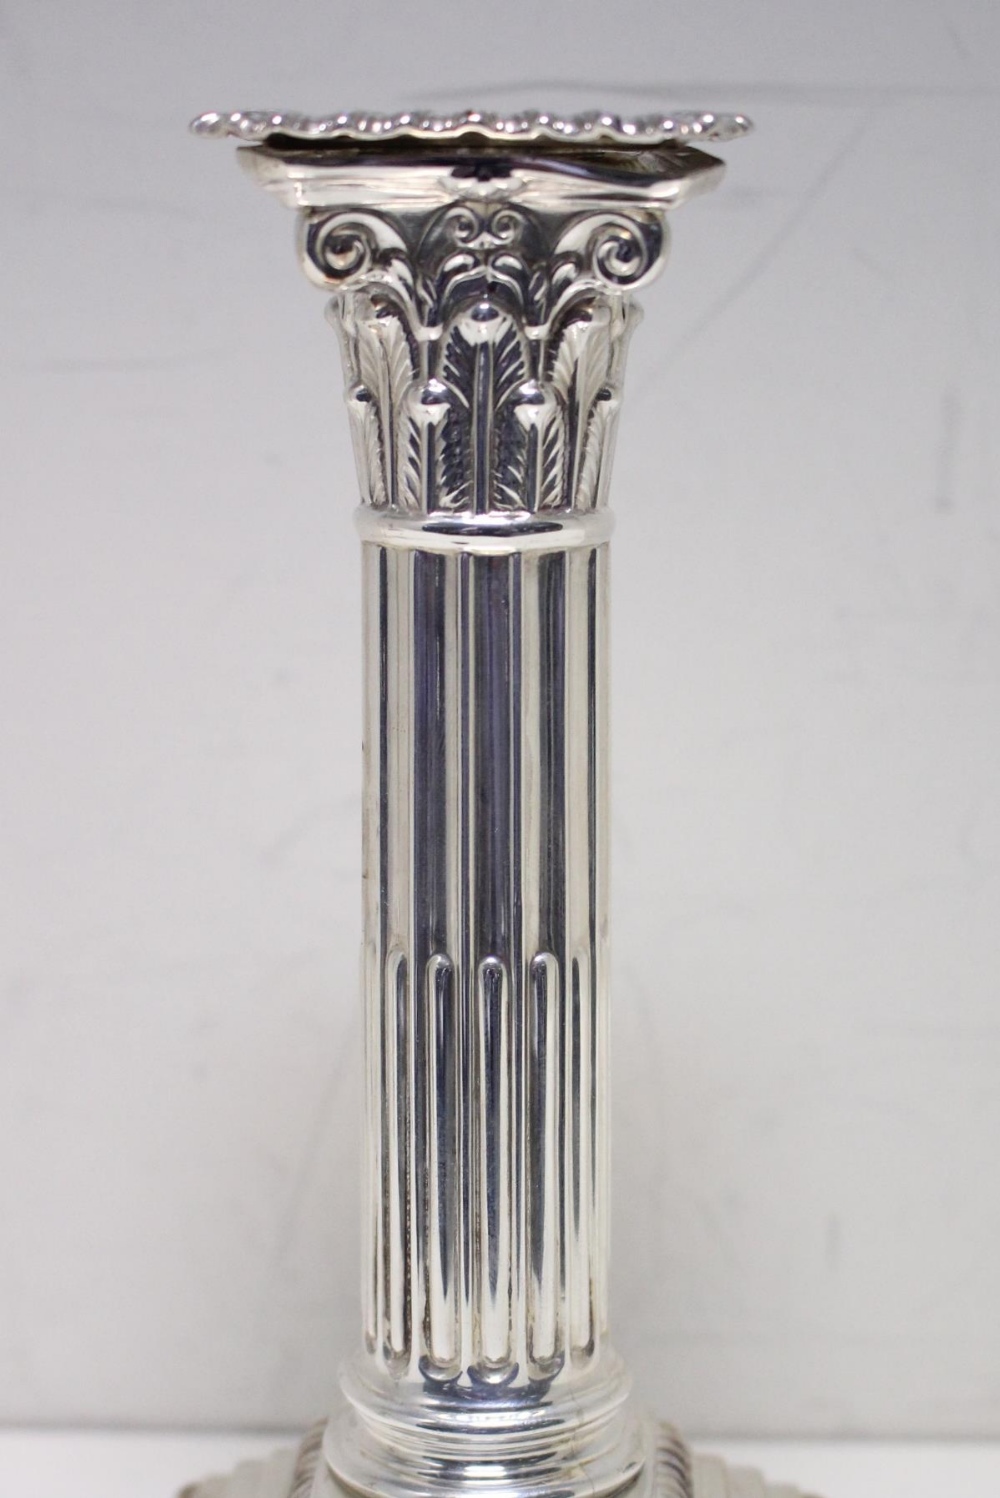 A pair of dwarf silver candlesticks, by James Kebberling Bembridge (Hawksworth, Eyre & Co Ltd), - Image 3 of 5